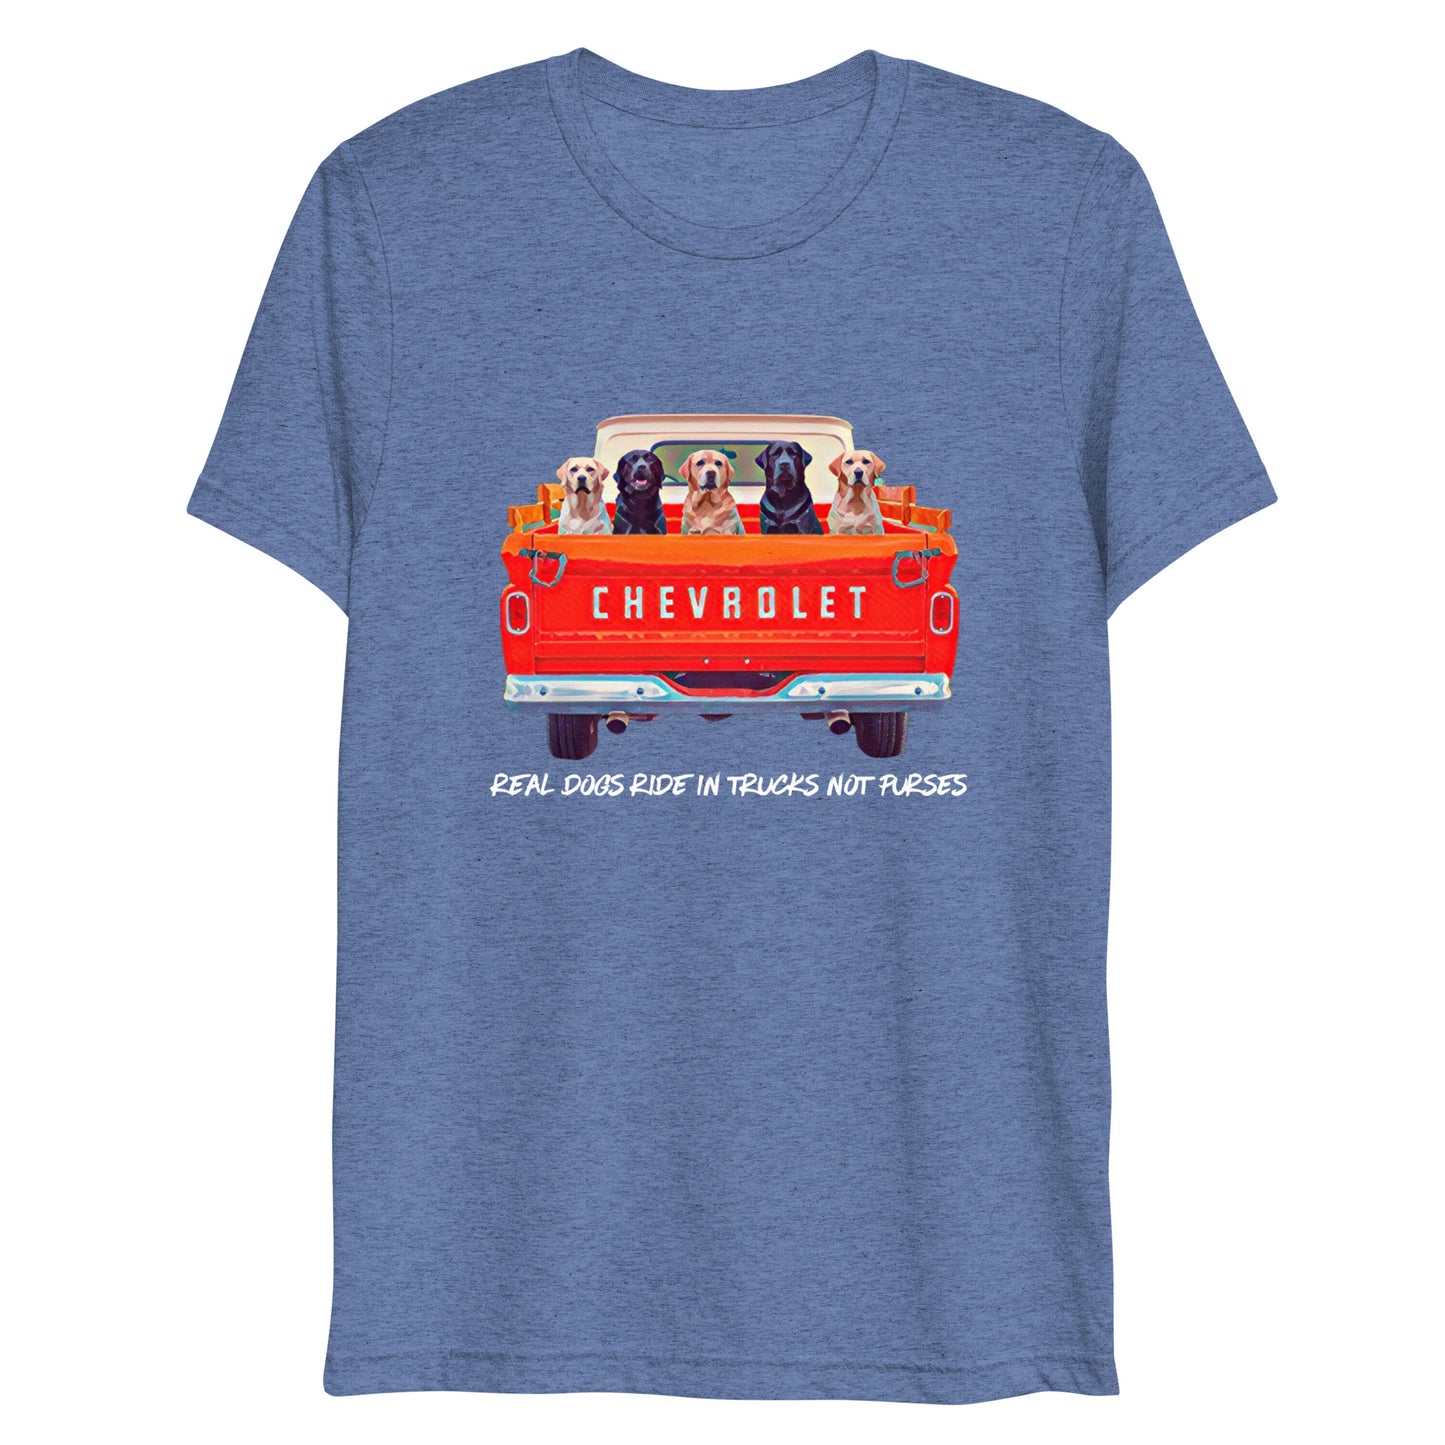 Real Dogs Ride in Trucks Short sleeve t-shirt